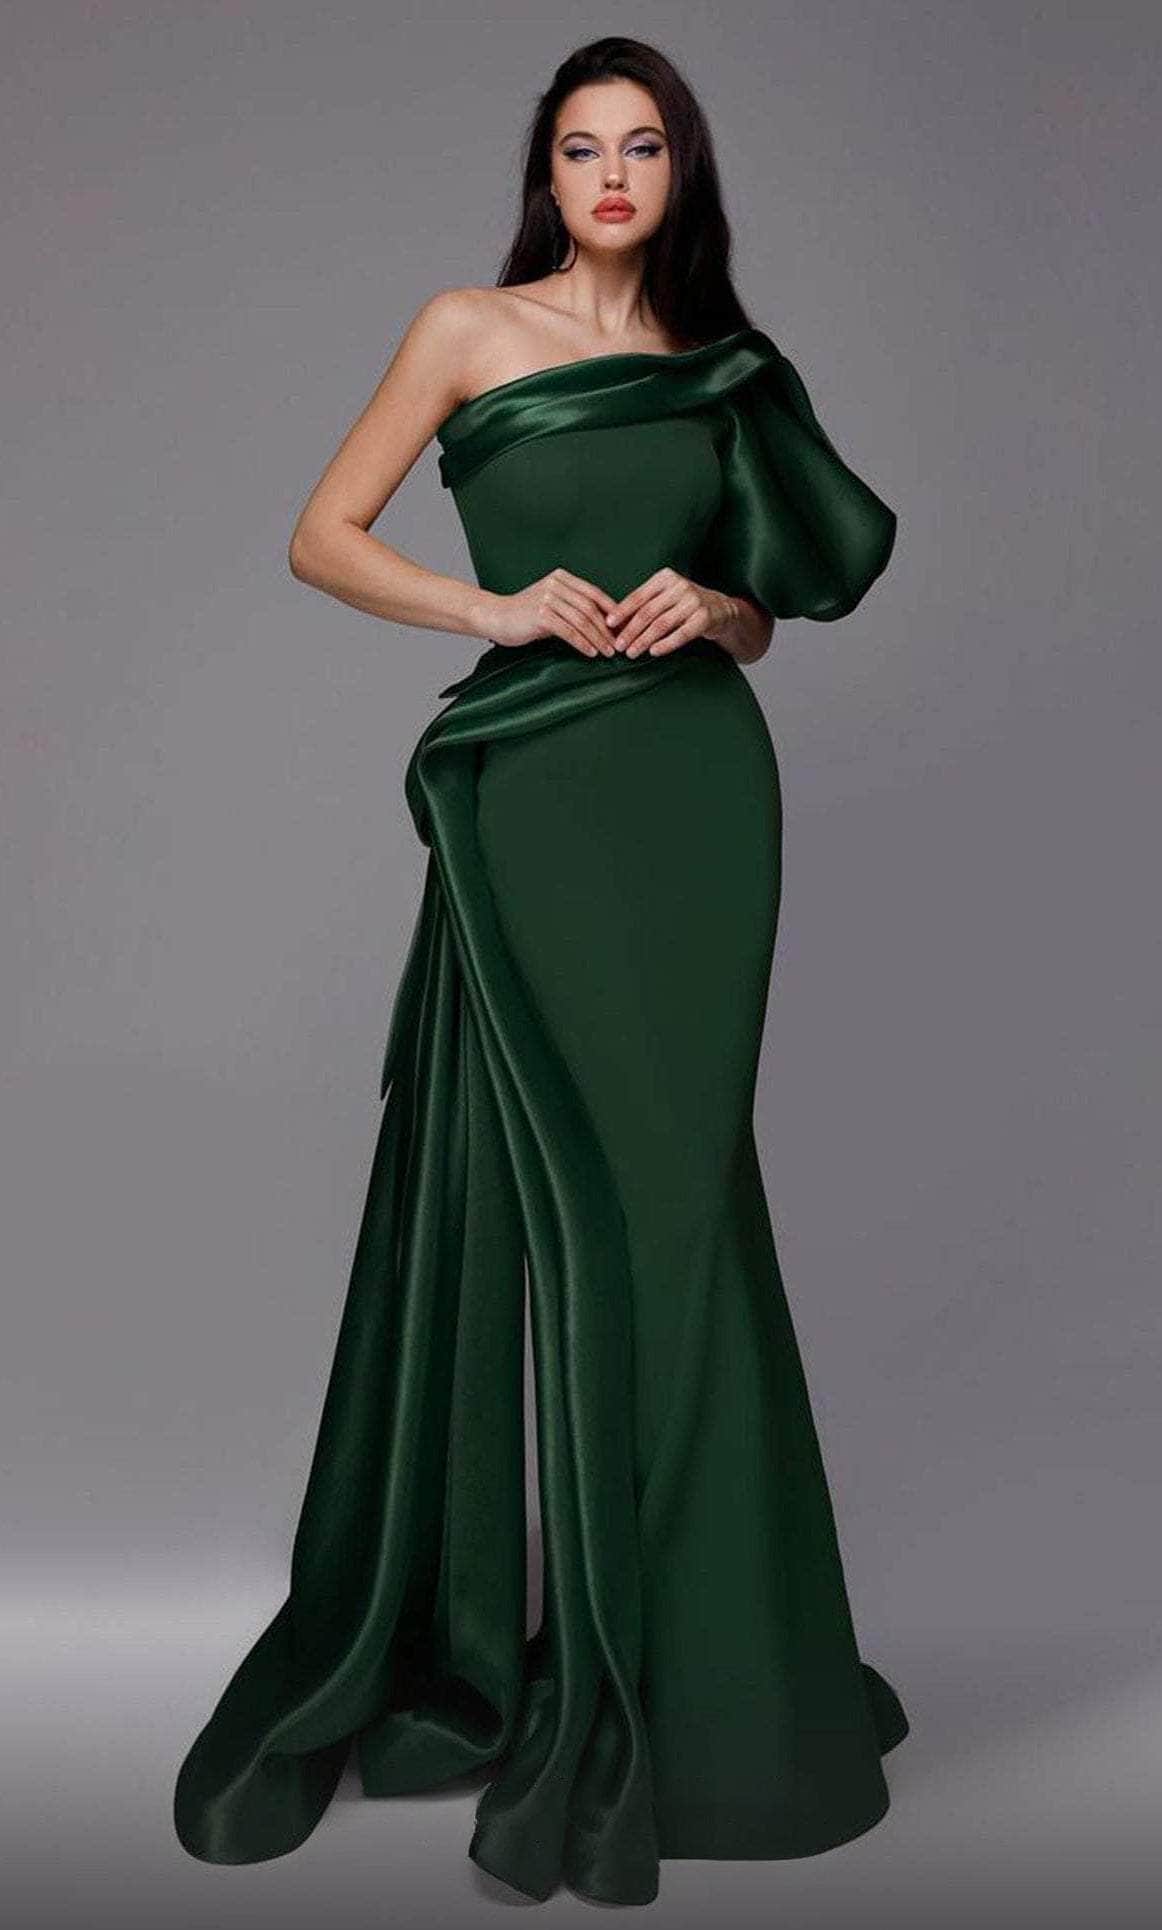 Image of MNM Couture 2722 - Puffed Sleeve Asymmetric Evening Gown